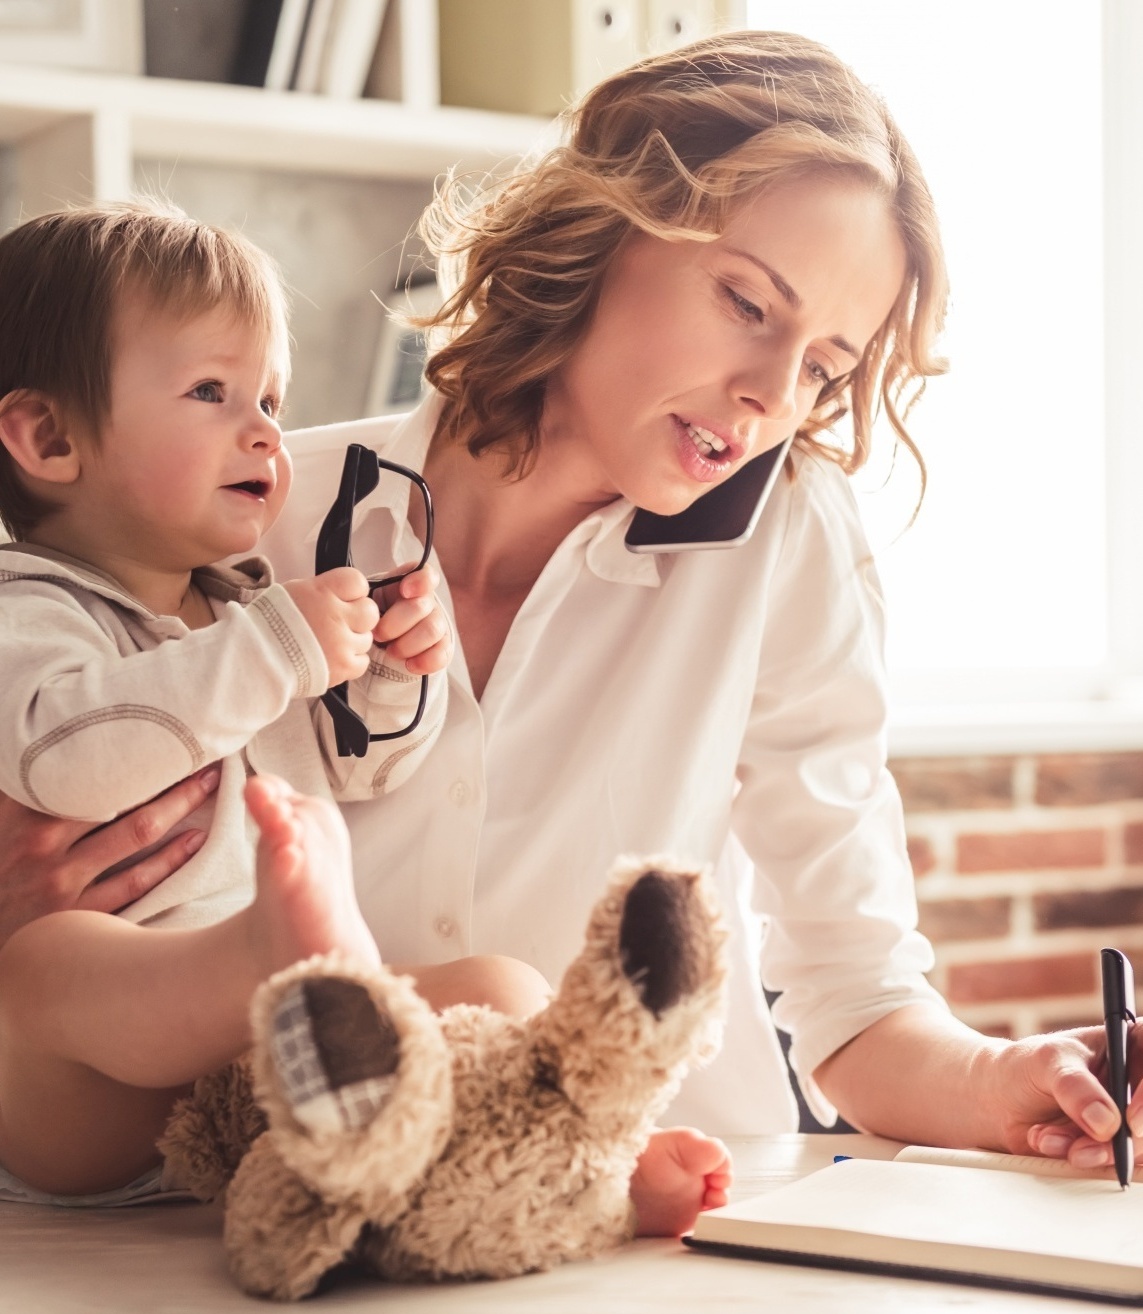 What Saying NO Can Do, blonde woman working and writing holding her baby who has taken glasses and has a stuffed animal